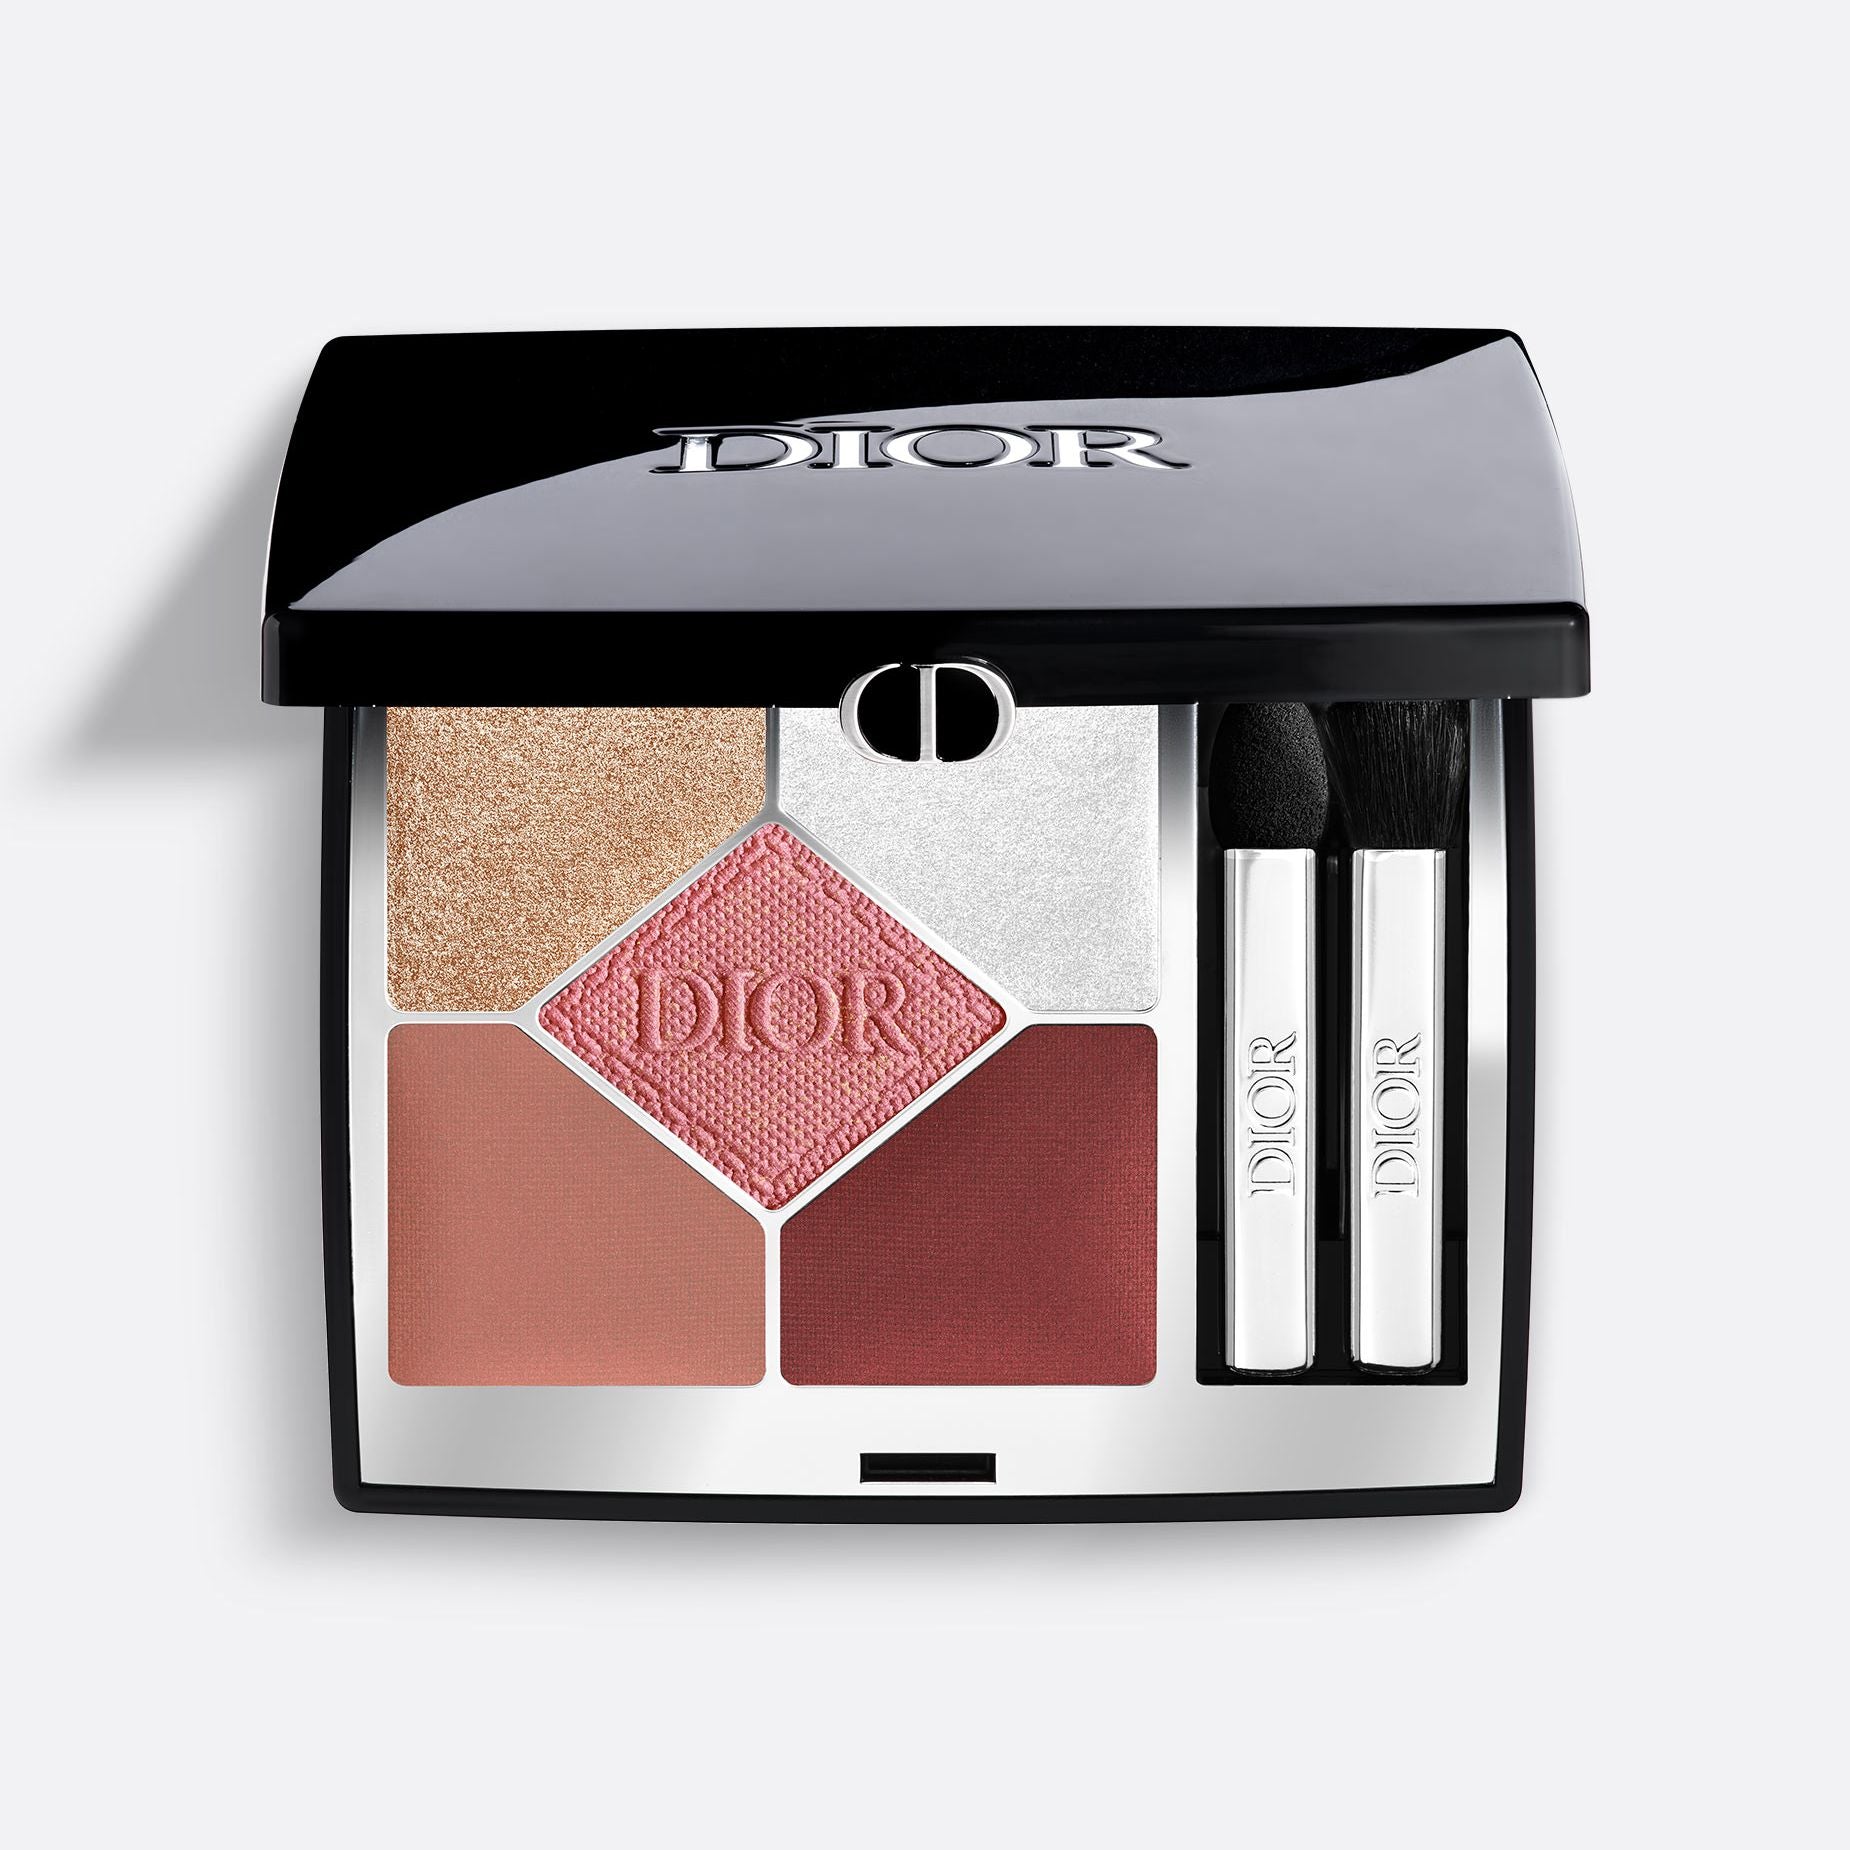 DIORSHOW 5 COULEURS - BLOOMING BOUDOIR LIMITED EDITION   ~ Eye Palette - 5 Eyeshadows - High Color and Long Wear